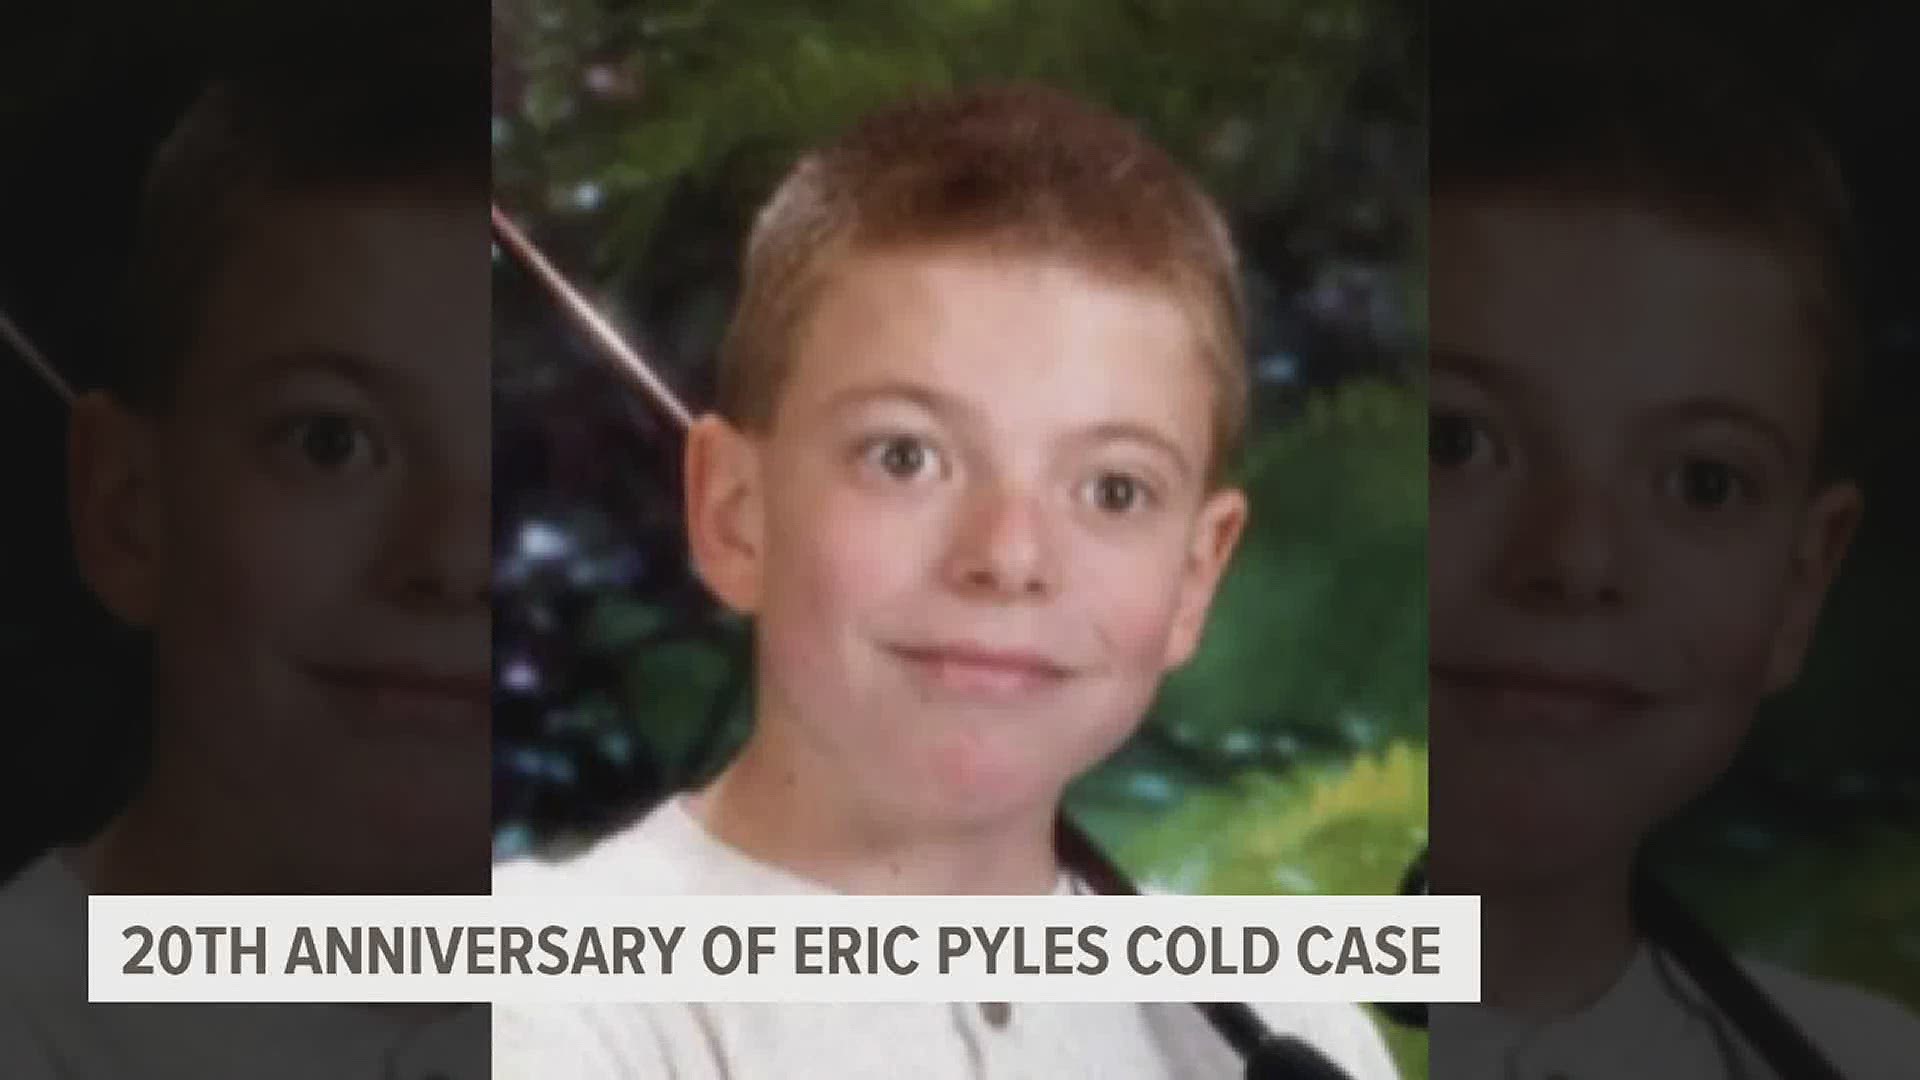 Eric Pyles was reported missing Dec. 12, 2000 and still there is no sign of him.